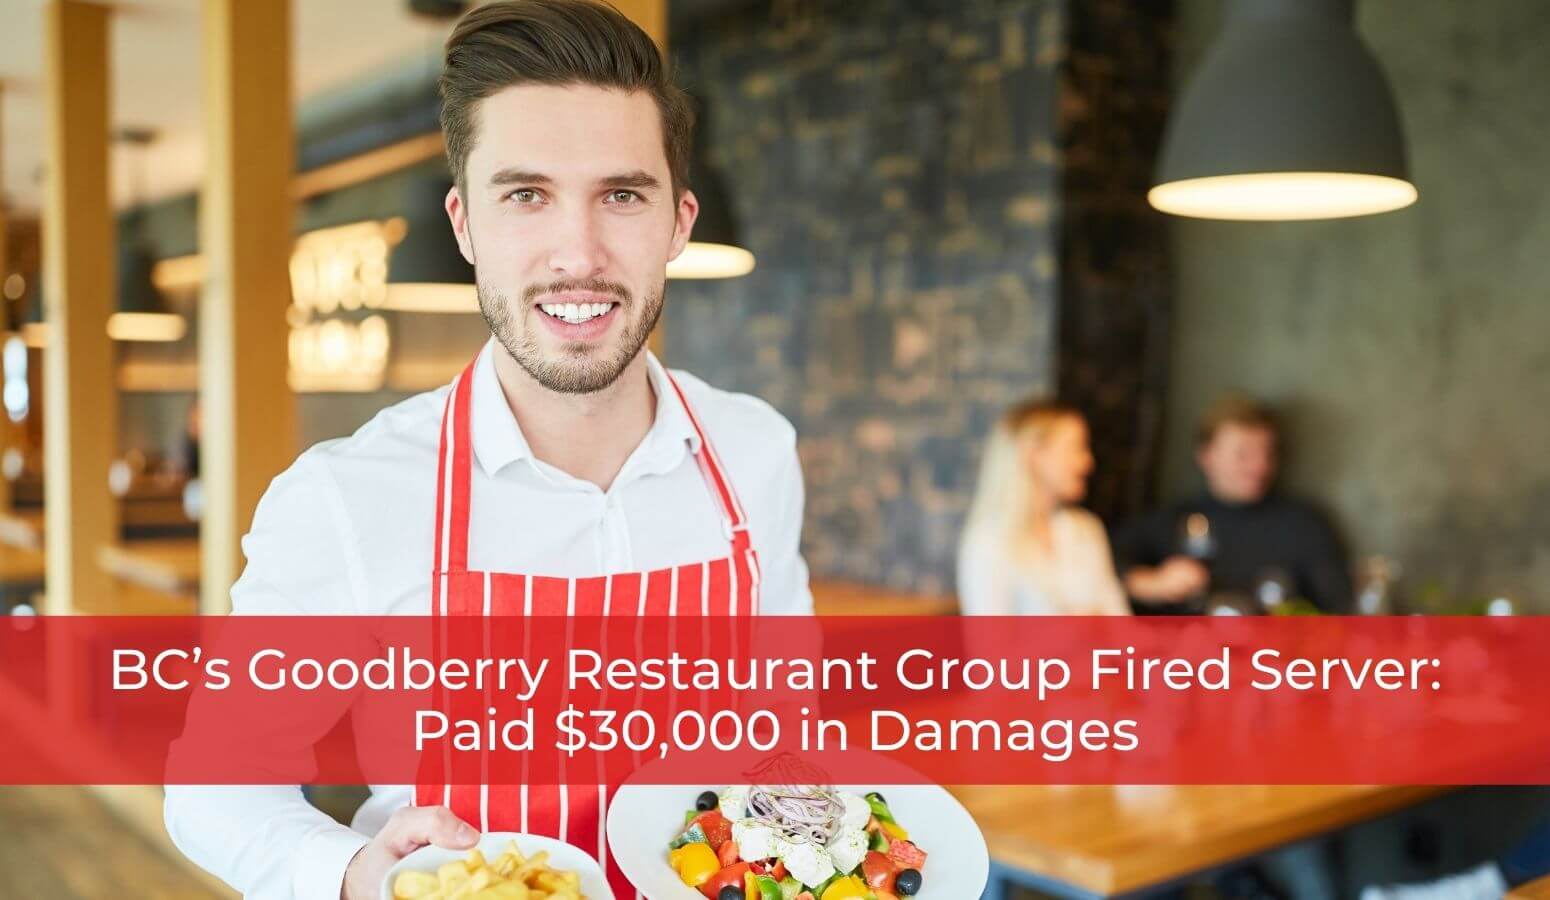 BC’s Goodberry Restaurant Group Fired Server - Oct 19 - Whitten & Lublin Employment Lawyers - Toronto Employment Lawyers - Human Rights